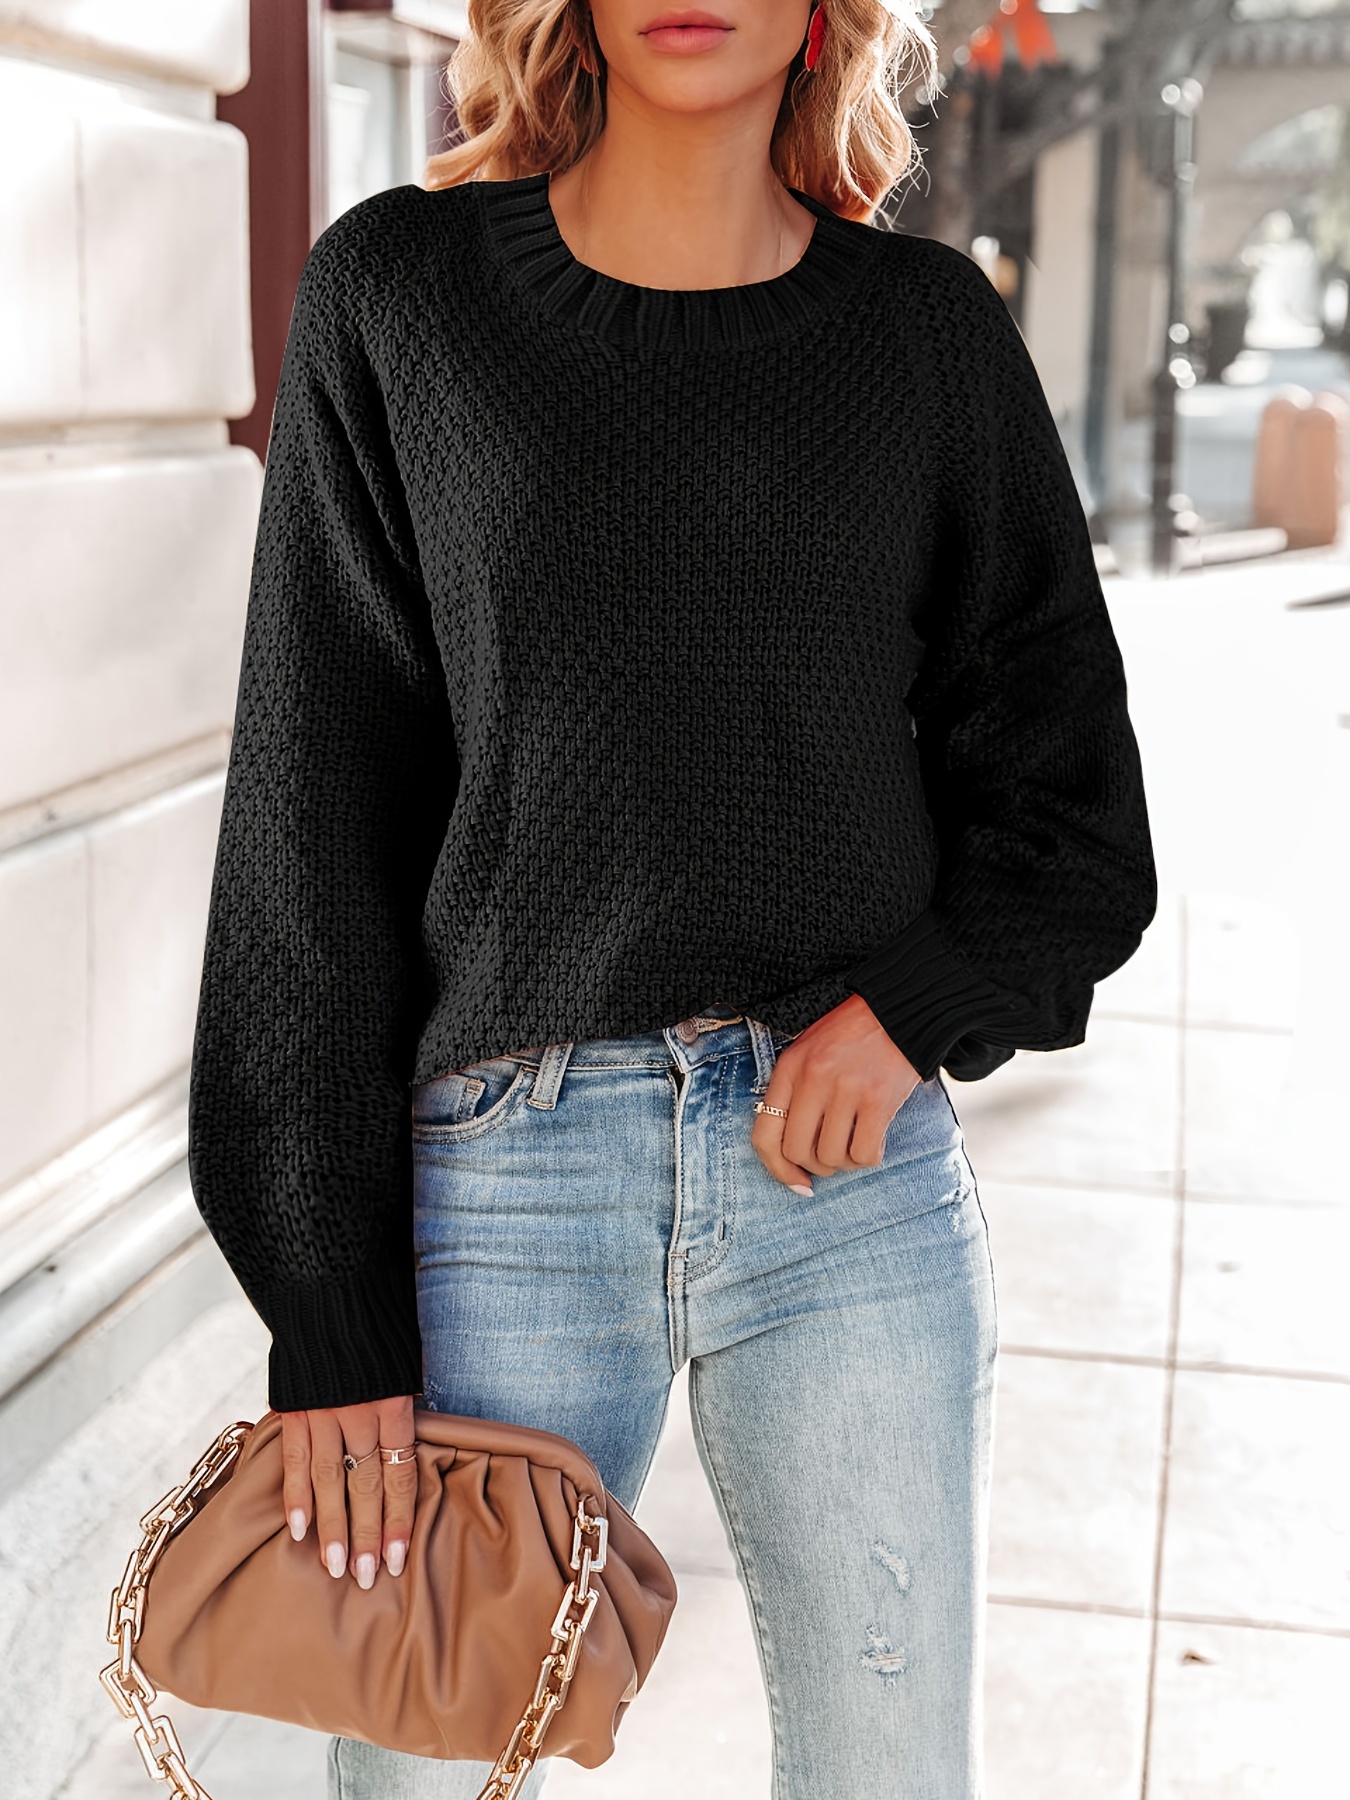 LOOSE KNIT SWEATER, Oversized Sweaters, Minimal Jumper, Comfy